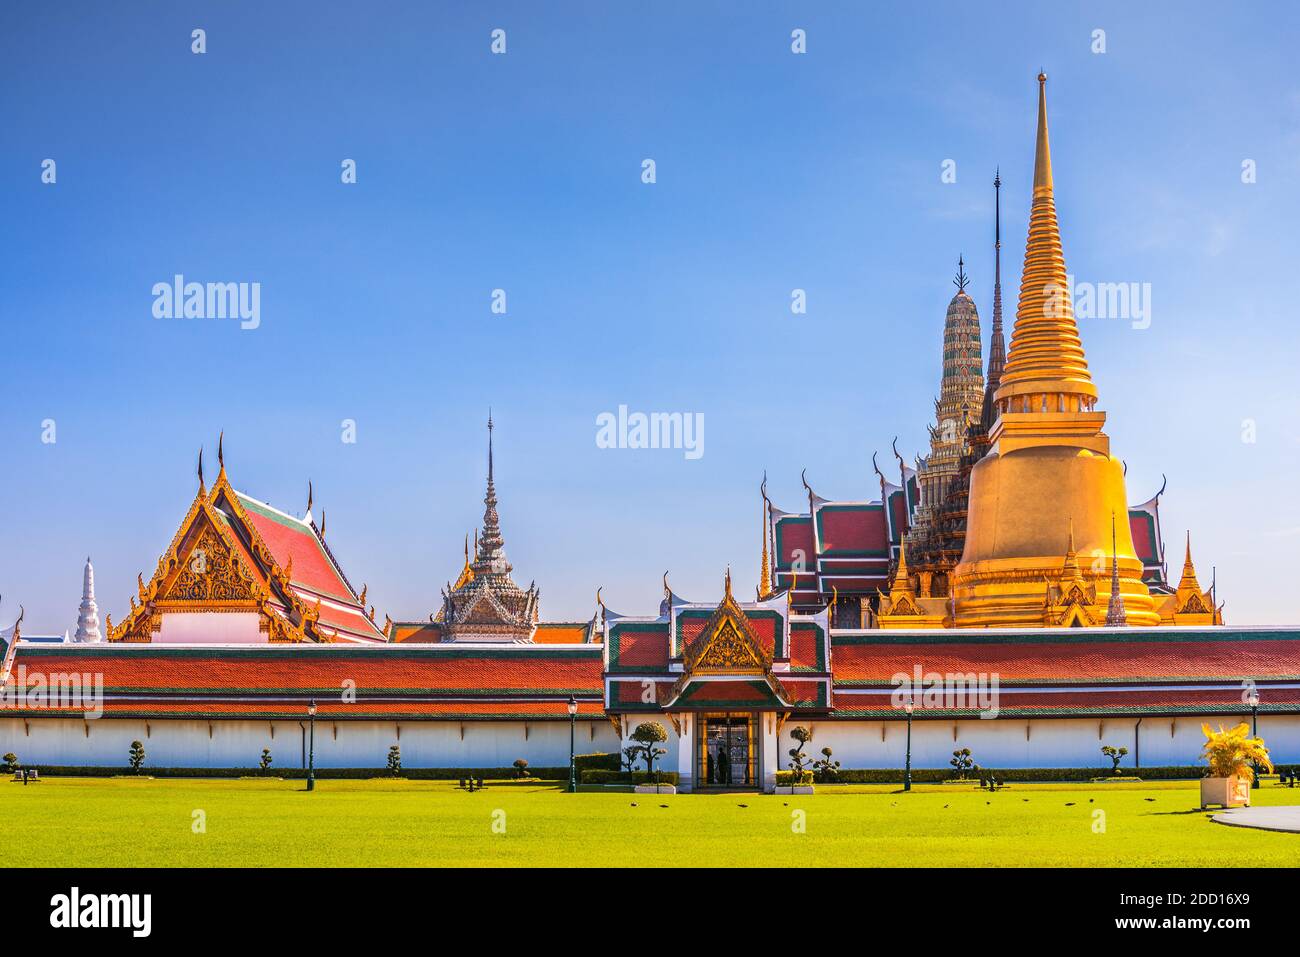 Grand Palace and Temple of Emerald Buddha Complex (Wat Phra Kaew) in Bangkok, Thailand Stock Photo